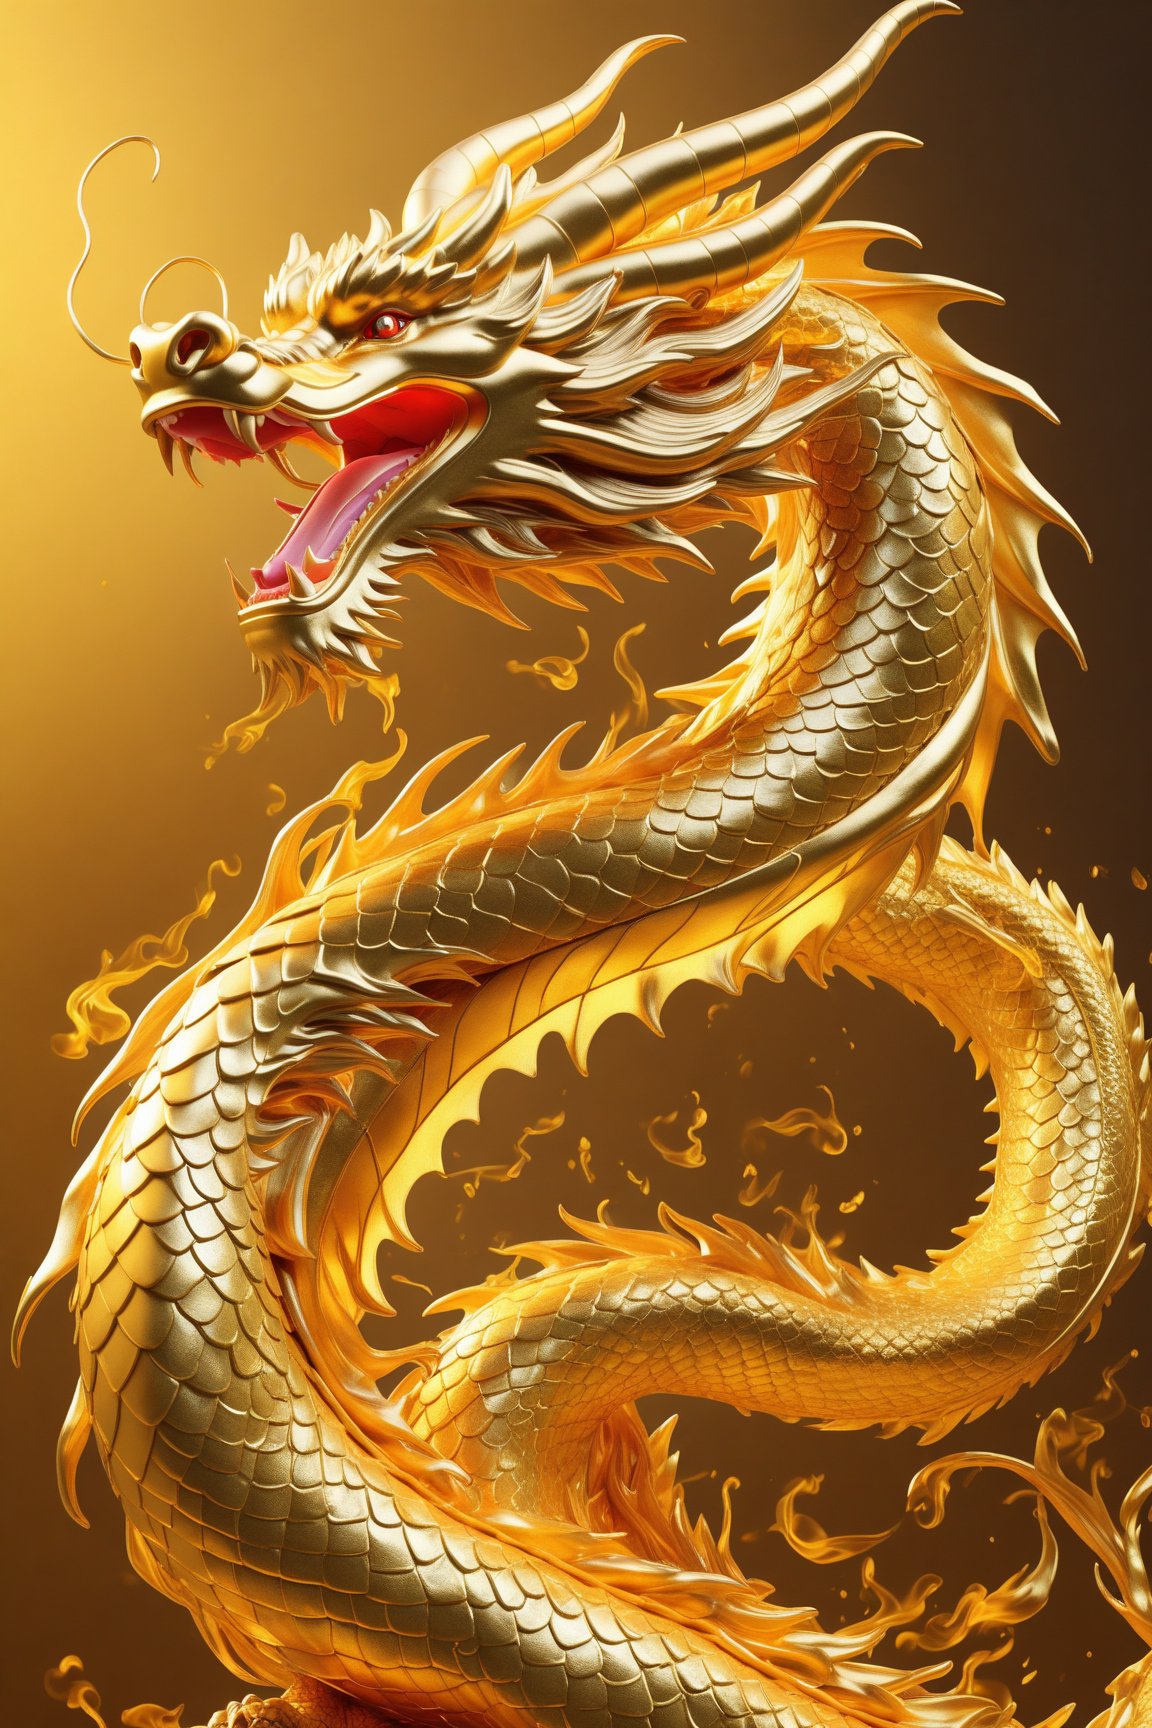 A smooth Chinese golden dragon,  flaming dragon snake,  dragon oil painting,  Chinese dragon,  perfect smooth body lines,  golden dragon,  flaming dragon,  majestic Chinese dragon,  phoenix dragon,  Chinese dragon concept art,  dragon art,  dragon god,  dragon on a yellow background,  ultra high definition,  realistic,  rich in detail,  perfect UHD image quality,  neon colors,  ultra fine edges,  incredible,  perfect golden ratio compositions,  magical fine technological lines,  cinematic,  high definition,  fine light and shadow,  high detail,  3D rendering,<lora:EMS-22494-EMS:1.500000>,<lora:EMS-20443-EMS:1.600000>,<lora:EMS-24184-EMS:1.400000>